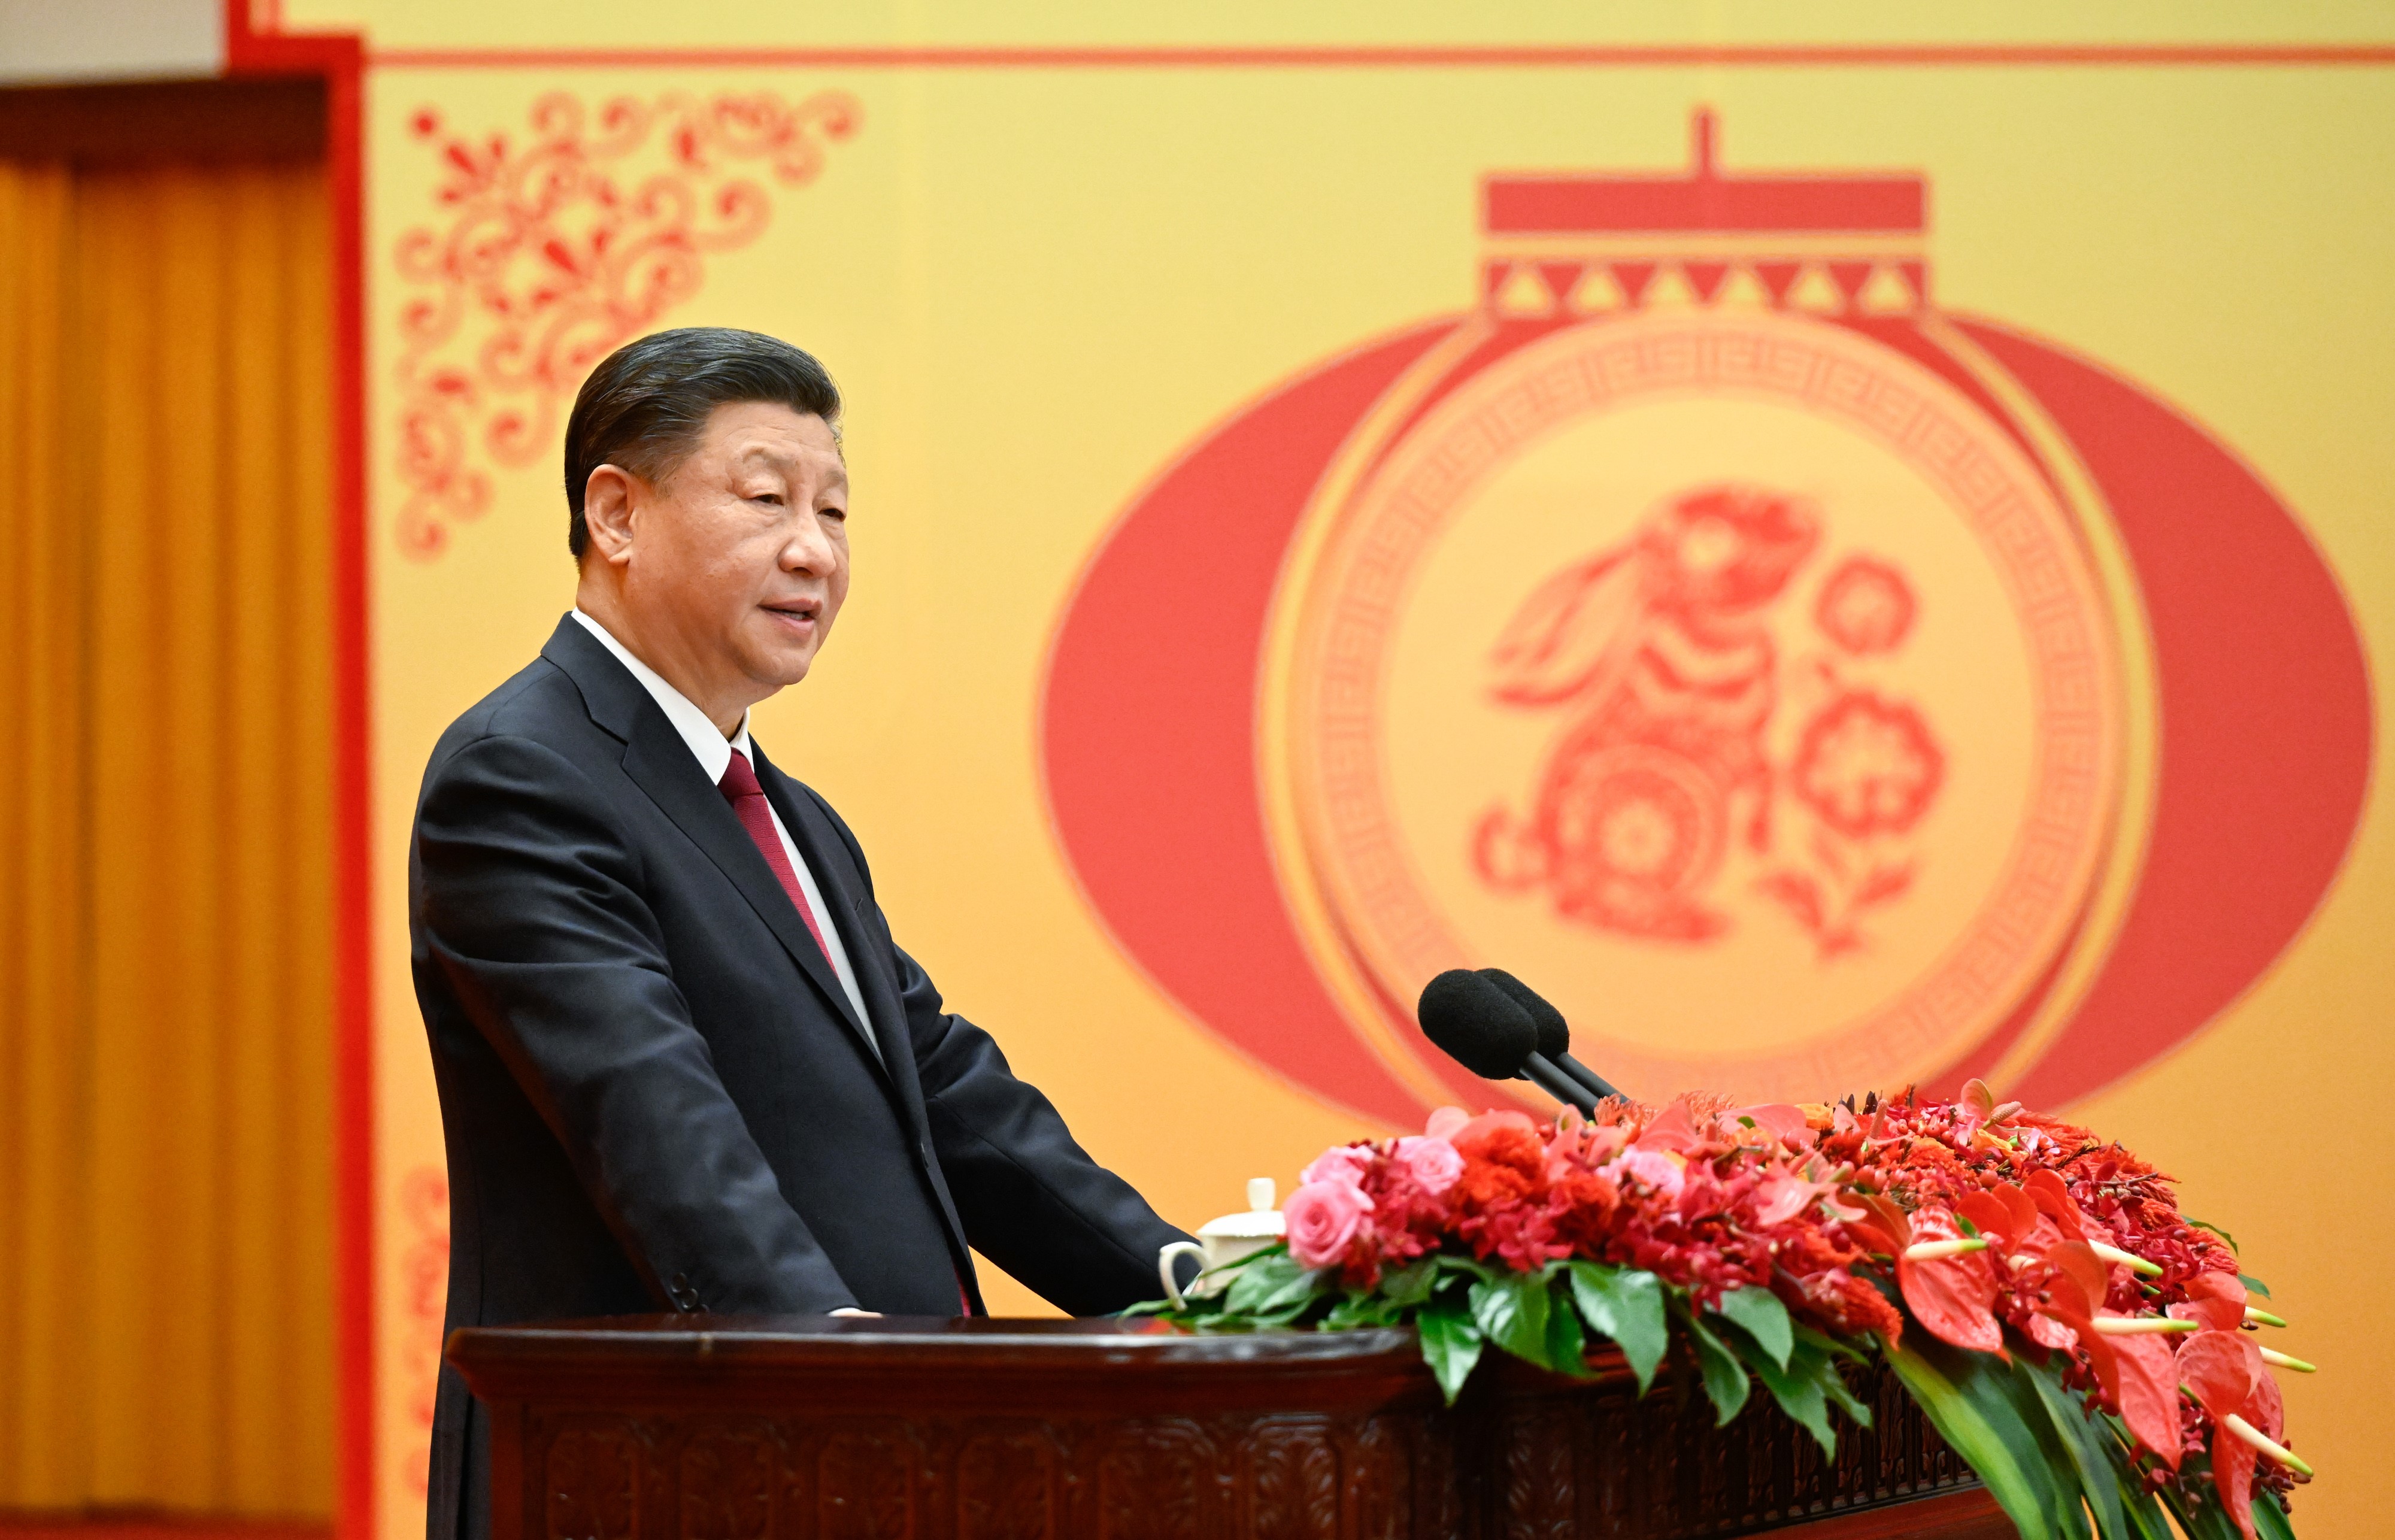 Xi Jinping speaks at a Spring Festival reception at the Great Hall of the People in Beijing, Jan. 20, 2023. (Li Xueren—Xinhua/Getty Images)